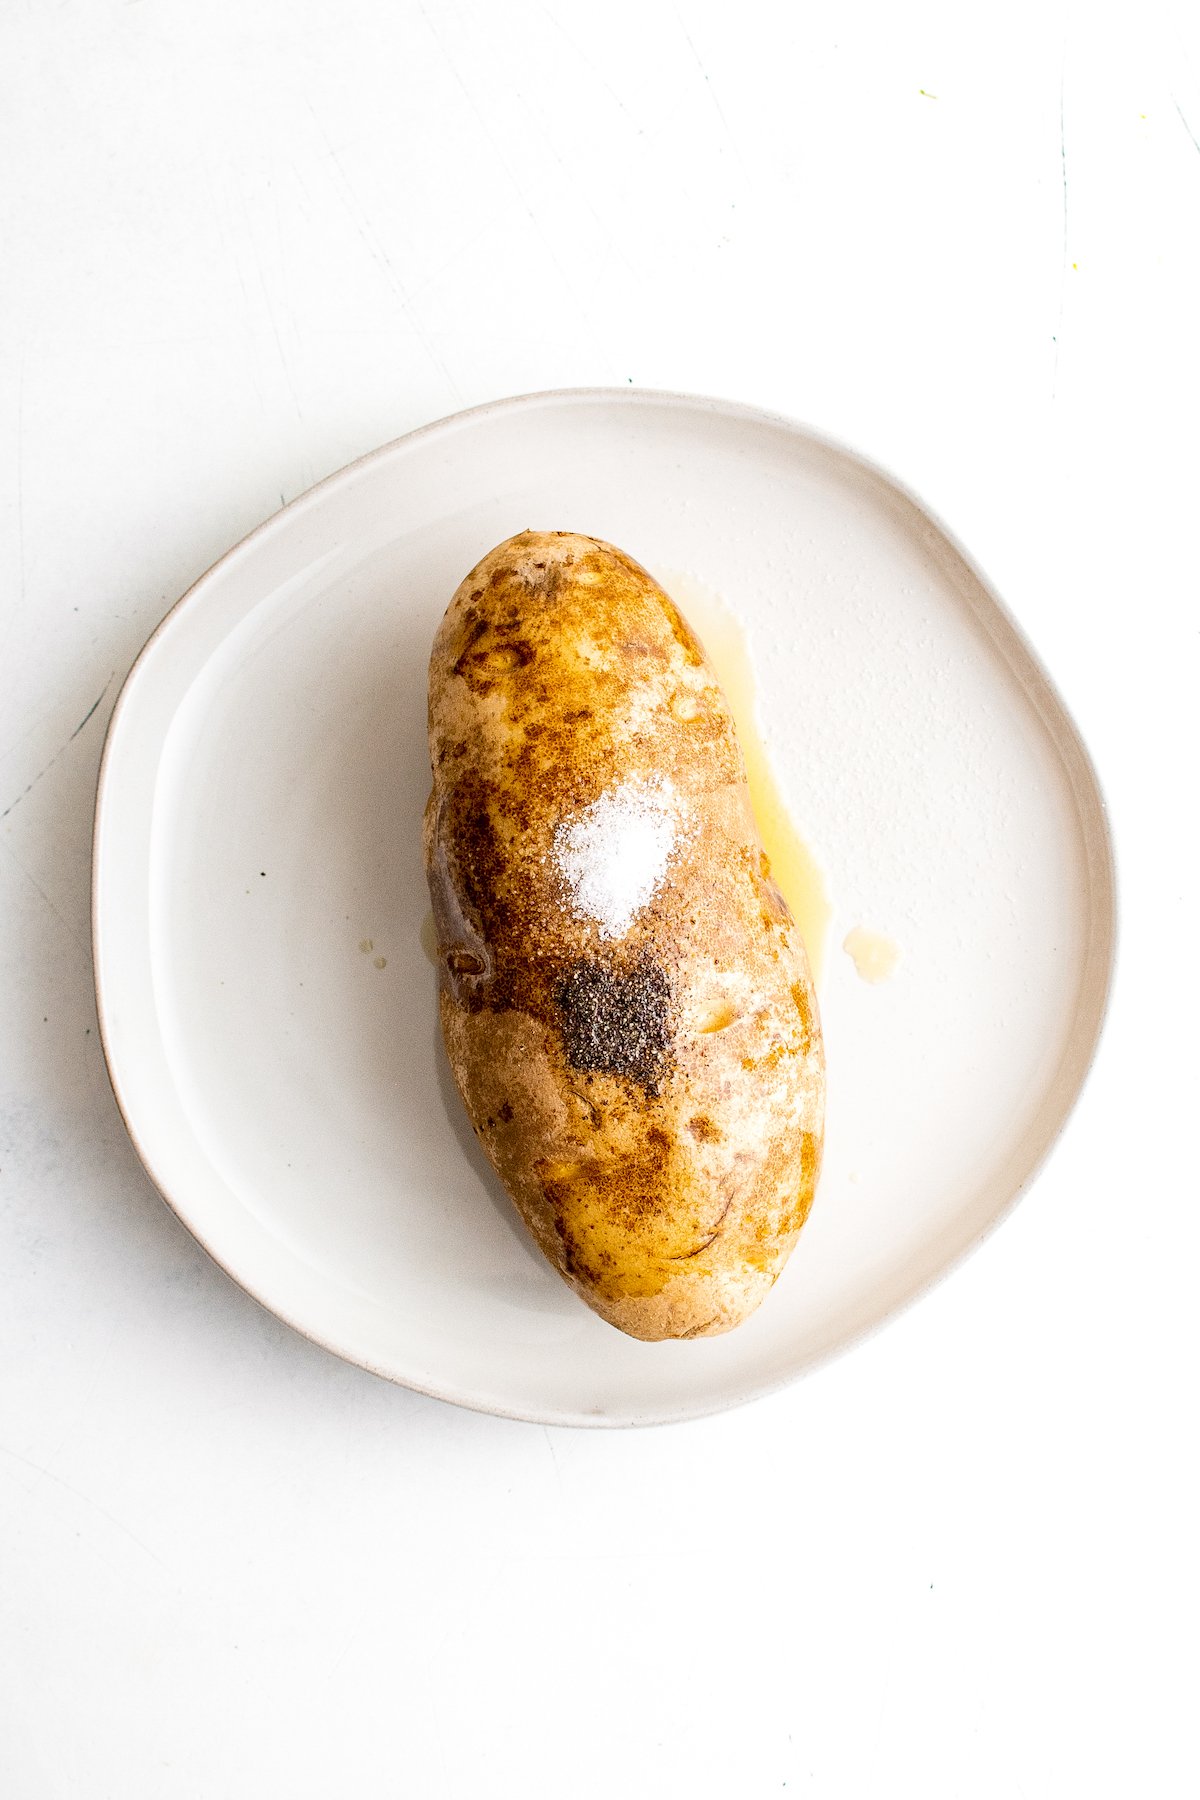 A potato topped with oil, salt, and pepper.